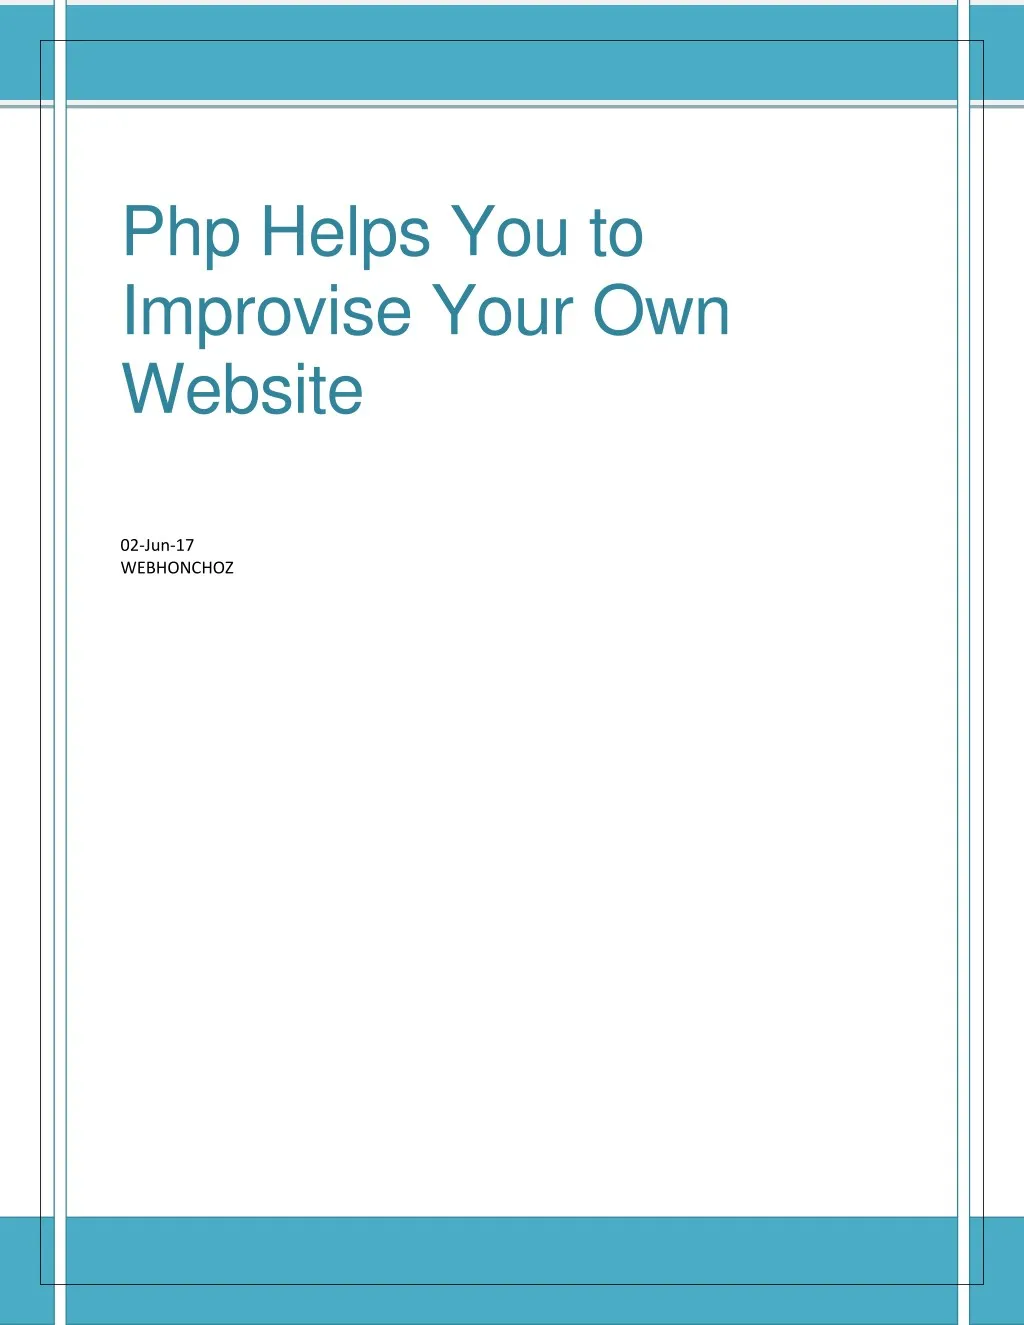 php helps you to improvise your own website